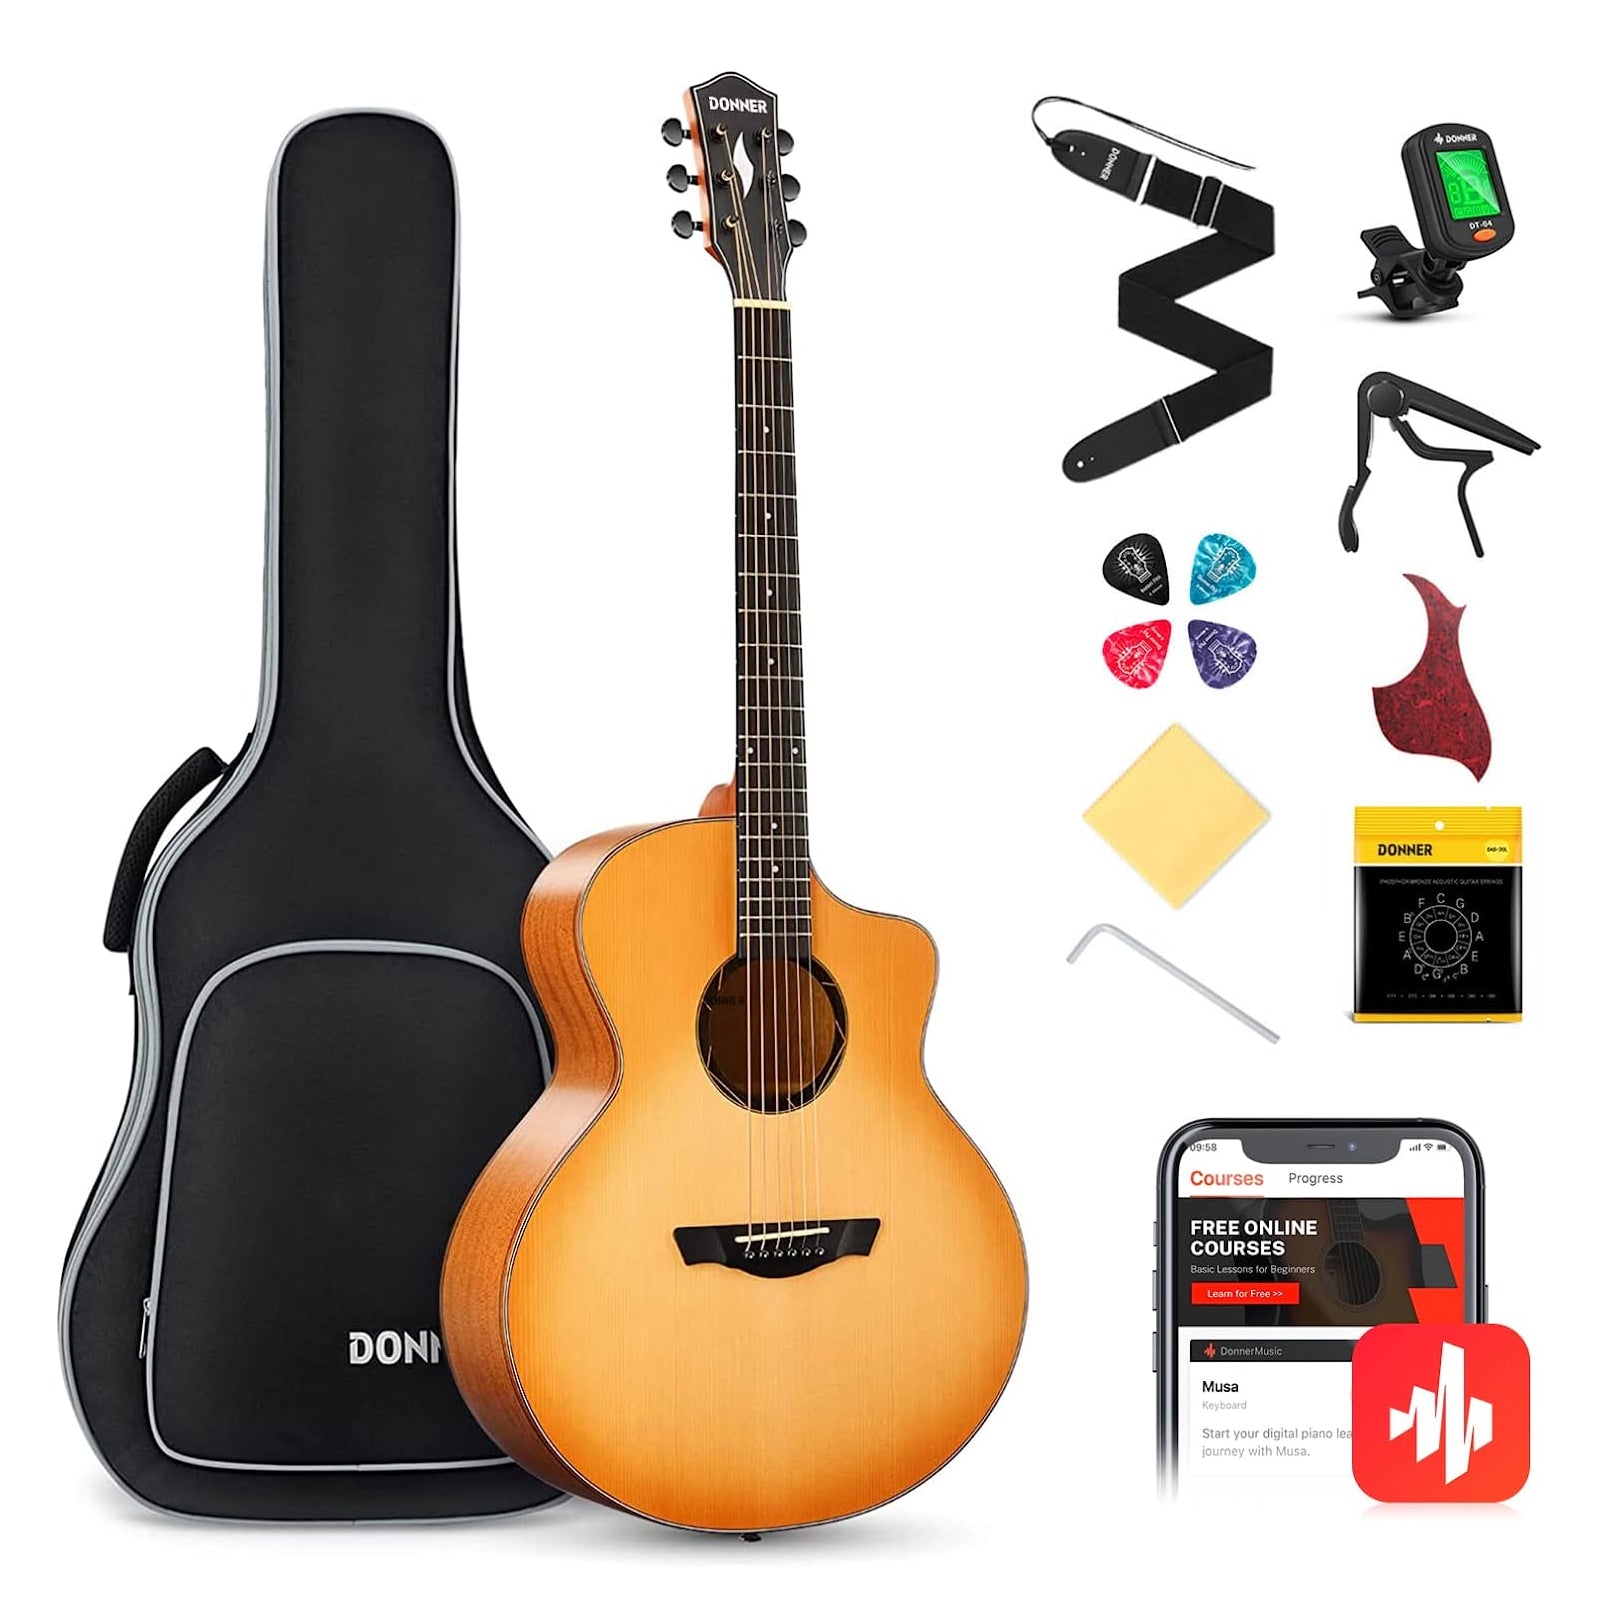 

Donner DAF-410 Full Size Acoustic Guitar Kit for Beginner 41 Inch Solid Spruce Top Cutaway JF Body with Free Online Class